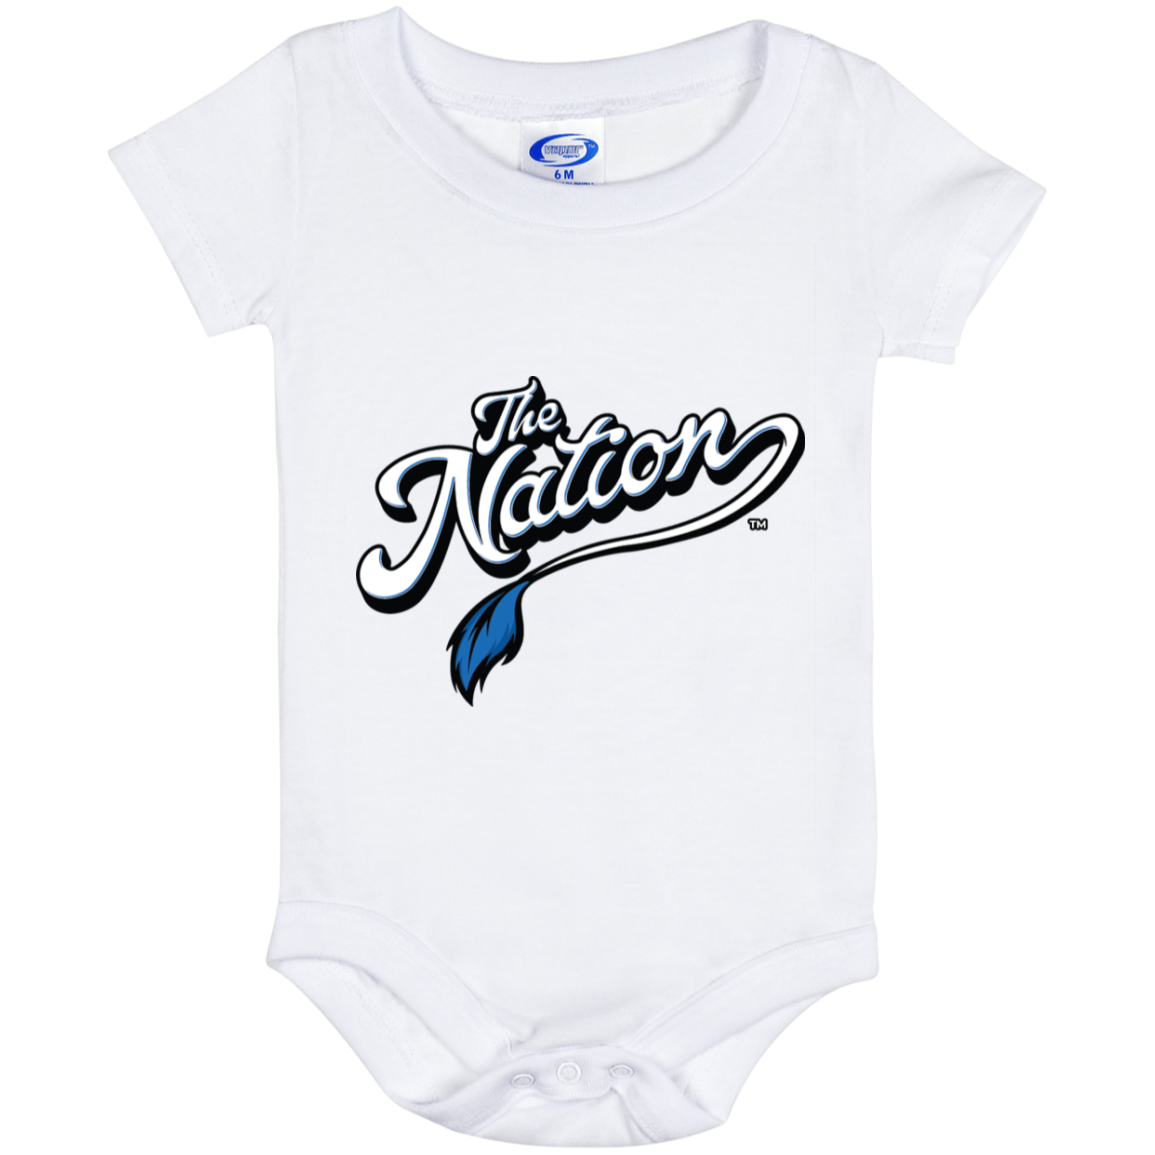 The Nation™ 6 Month Baby Onesie